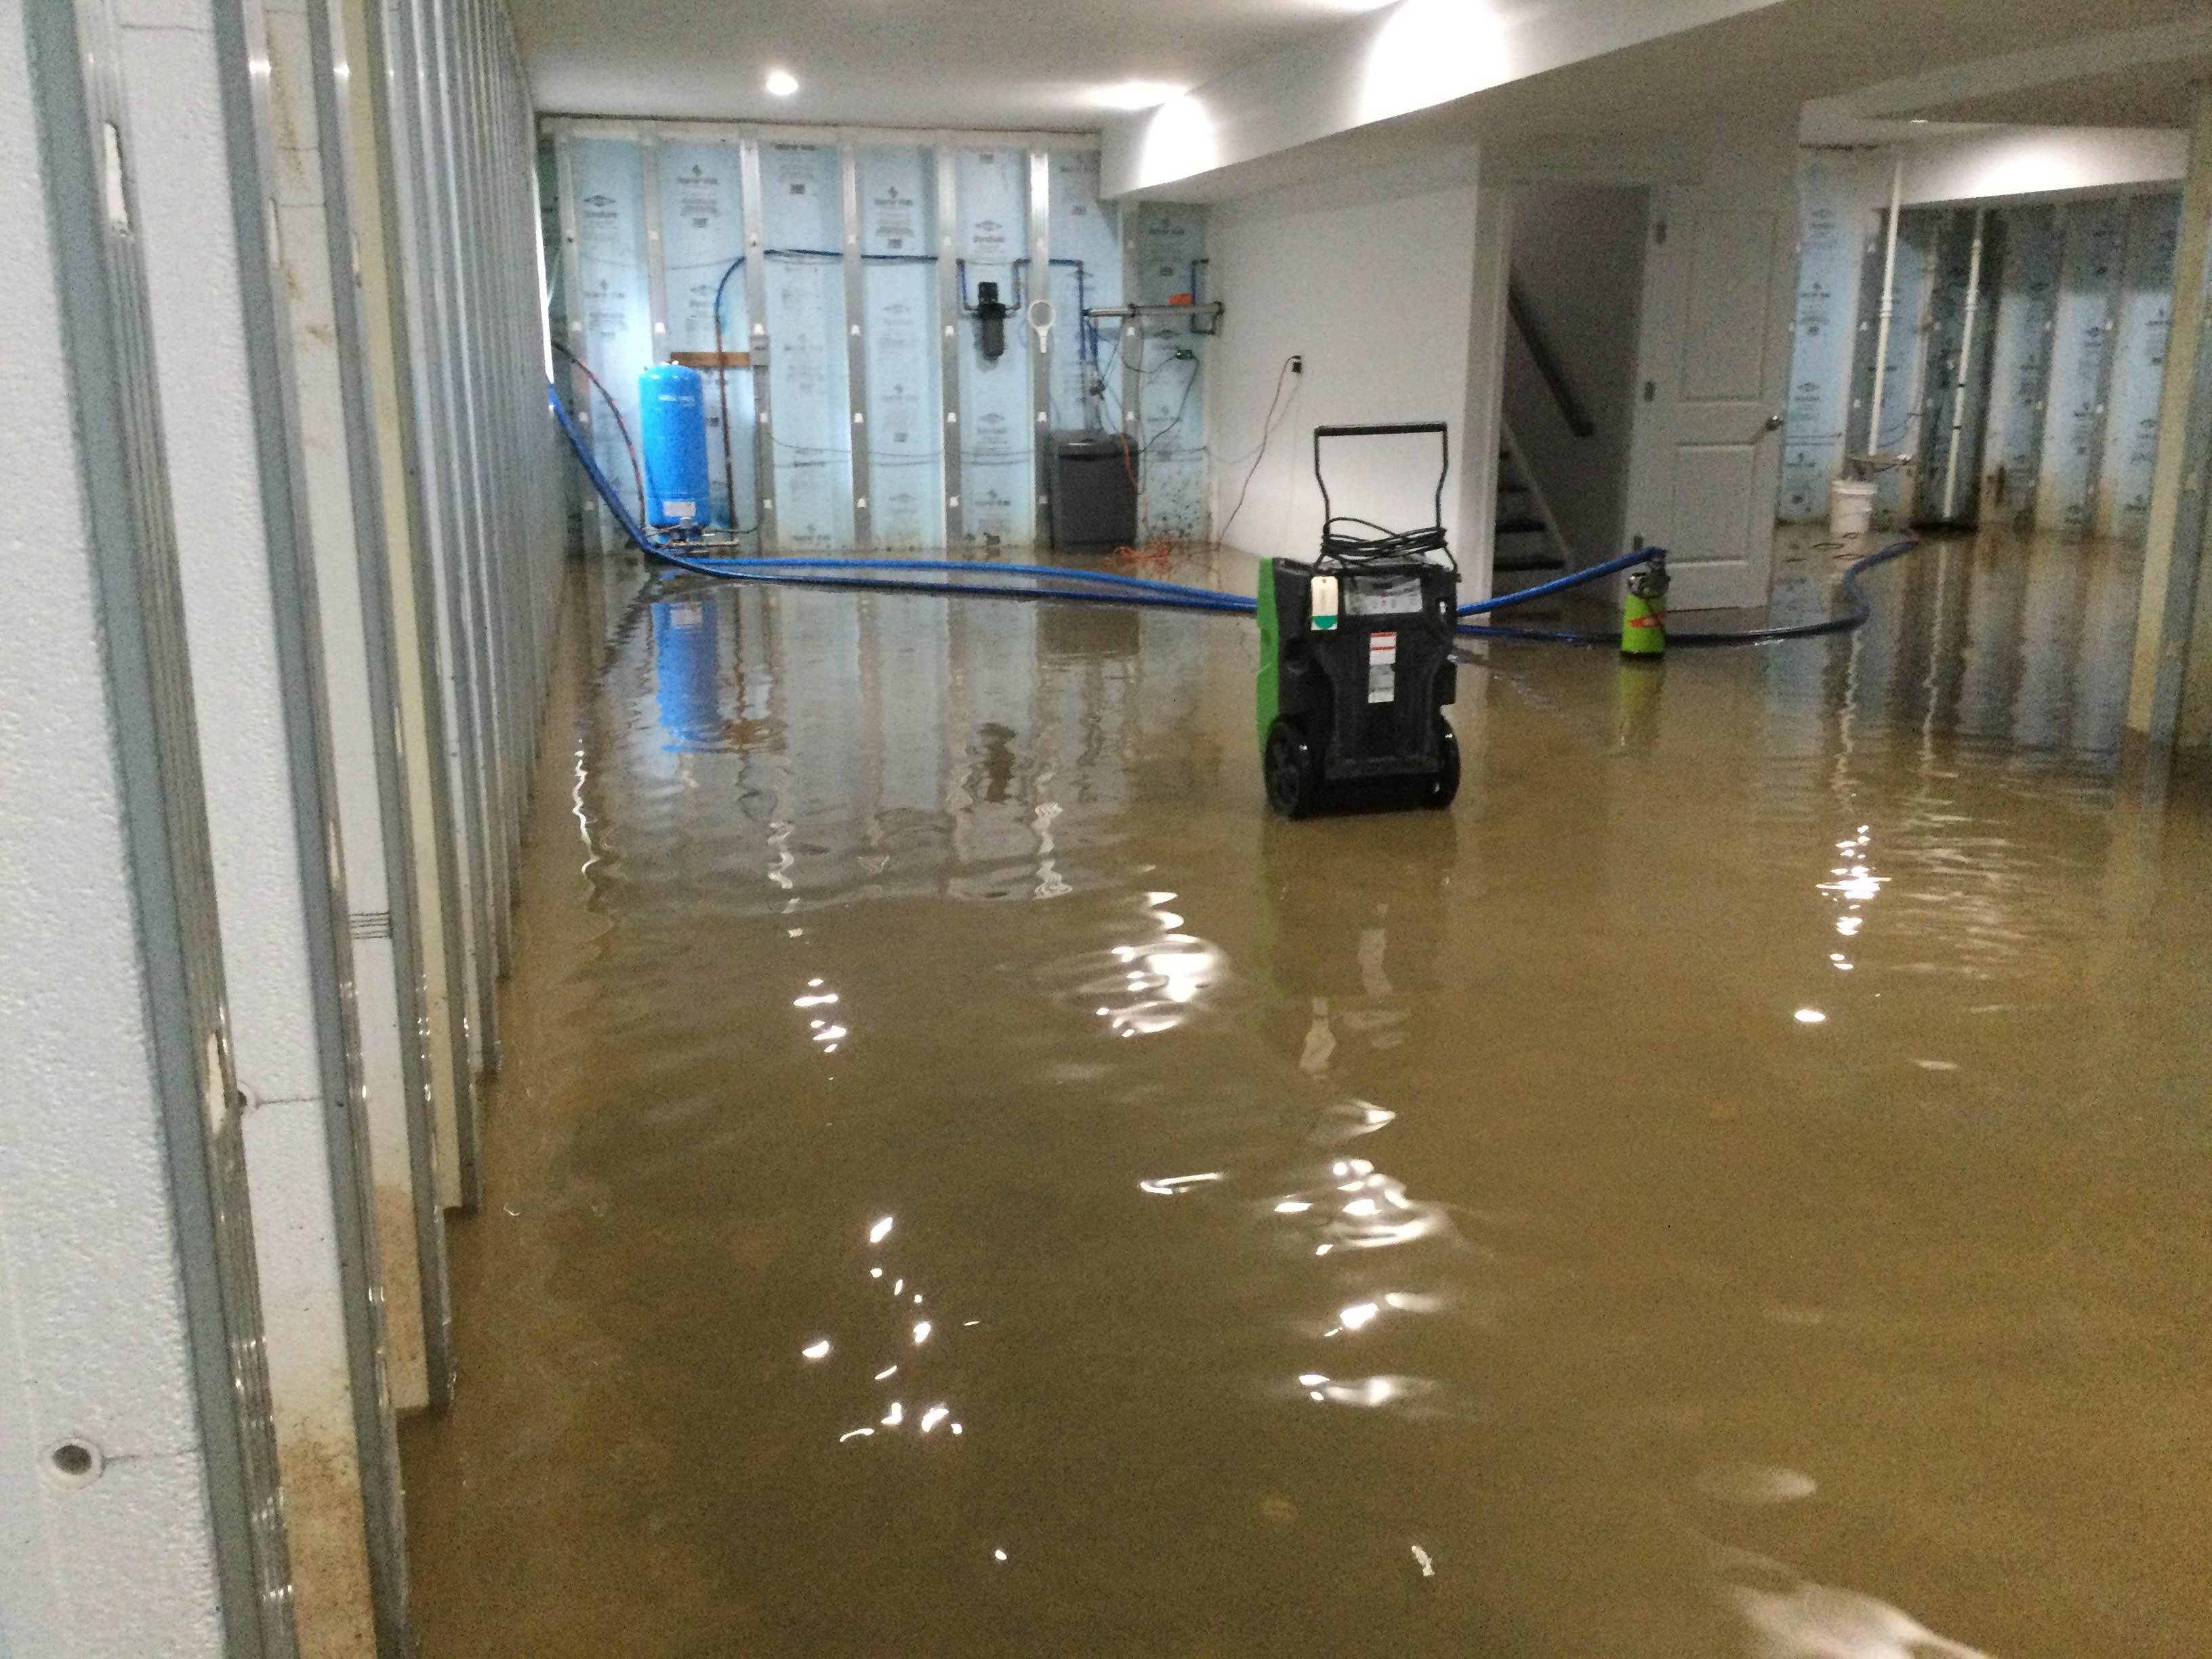 SERVPRO of Langhorne/Bensalem responded to this basement flooding and began our water restoration process.